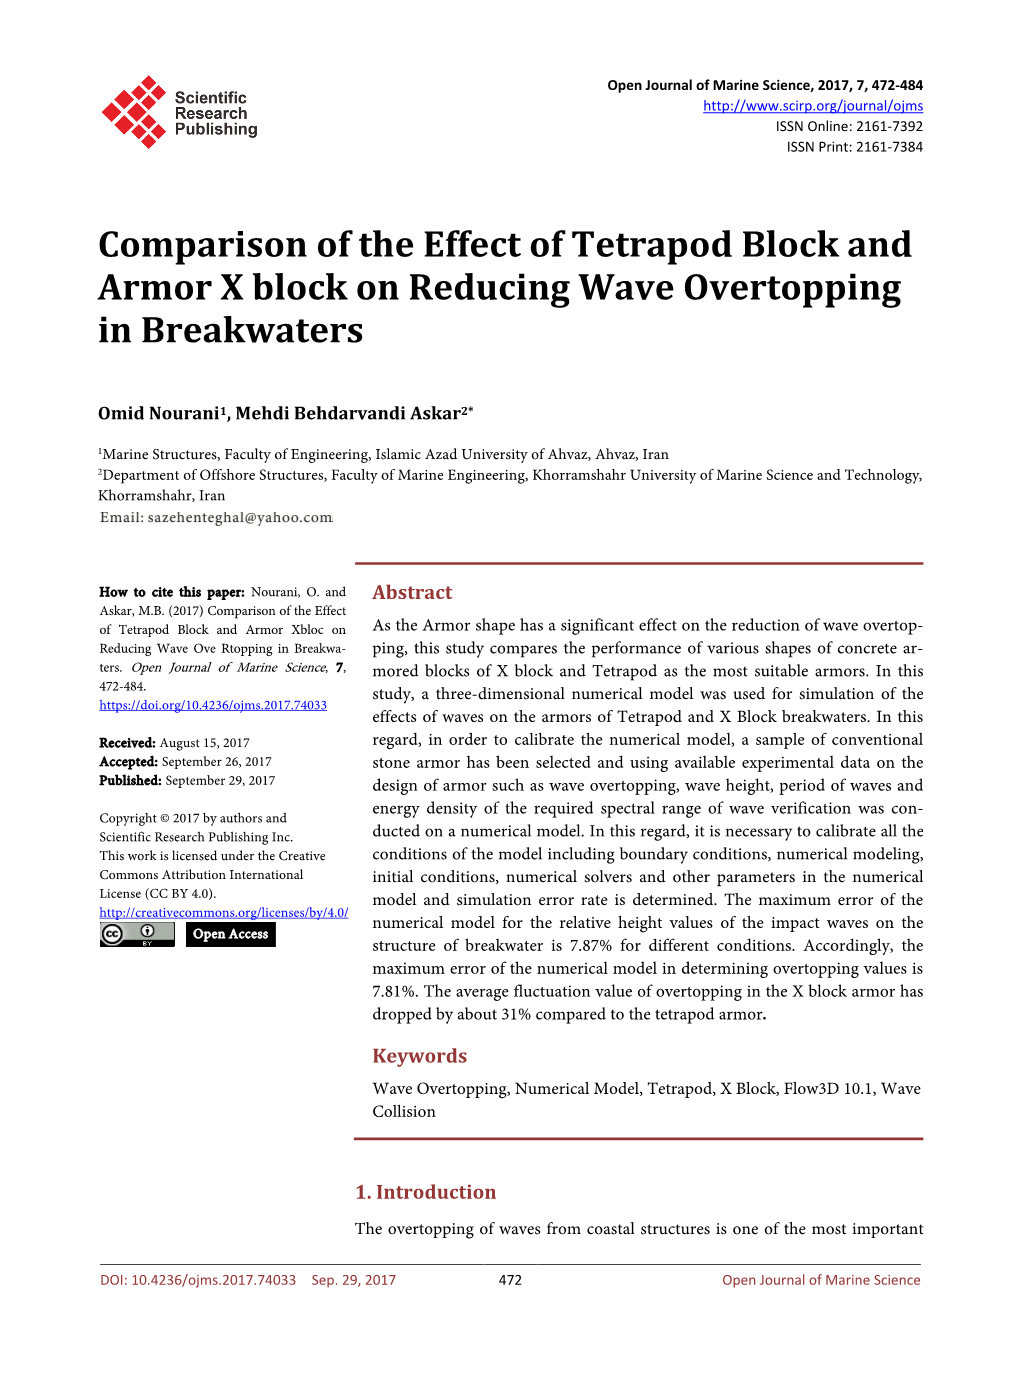 Comparison of the Effect of Tetrapod Block and Armor X Block on Reducing Wave Overtopping in Breakwaters